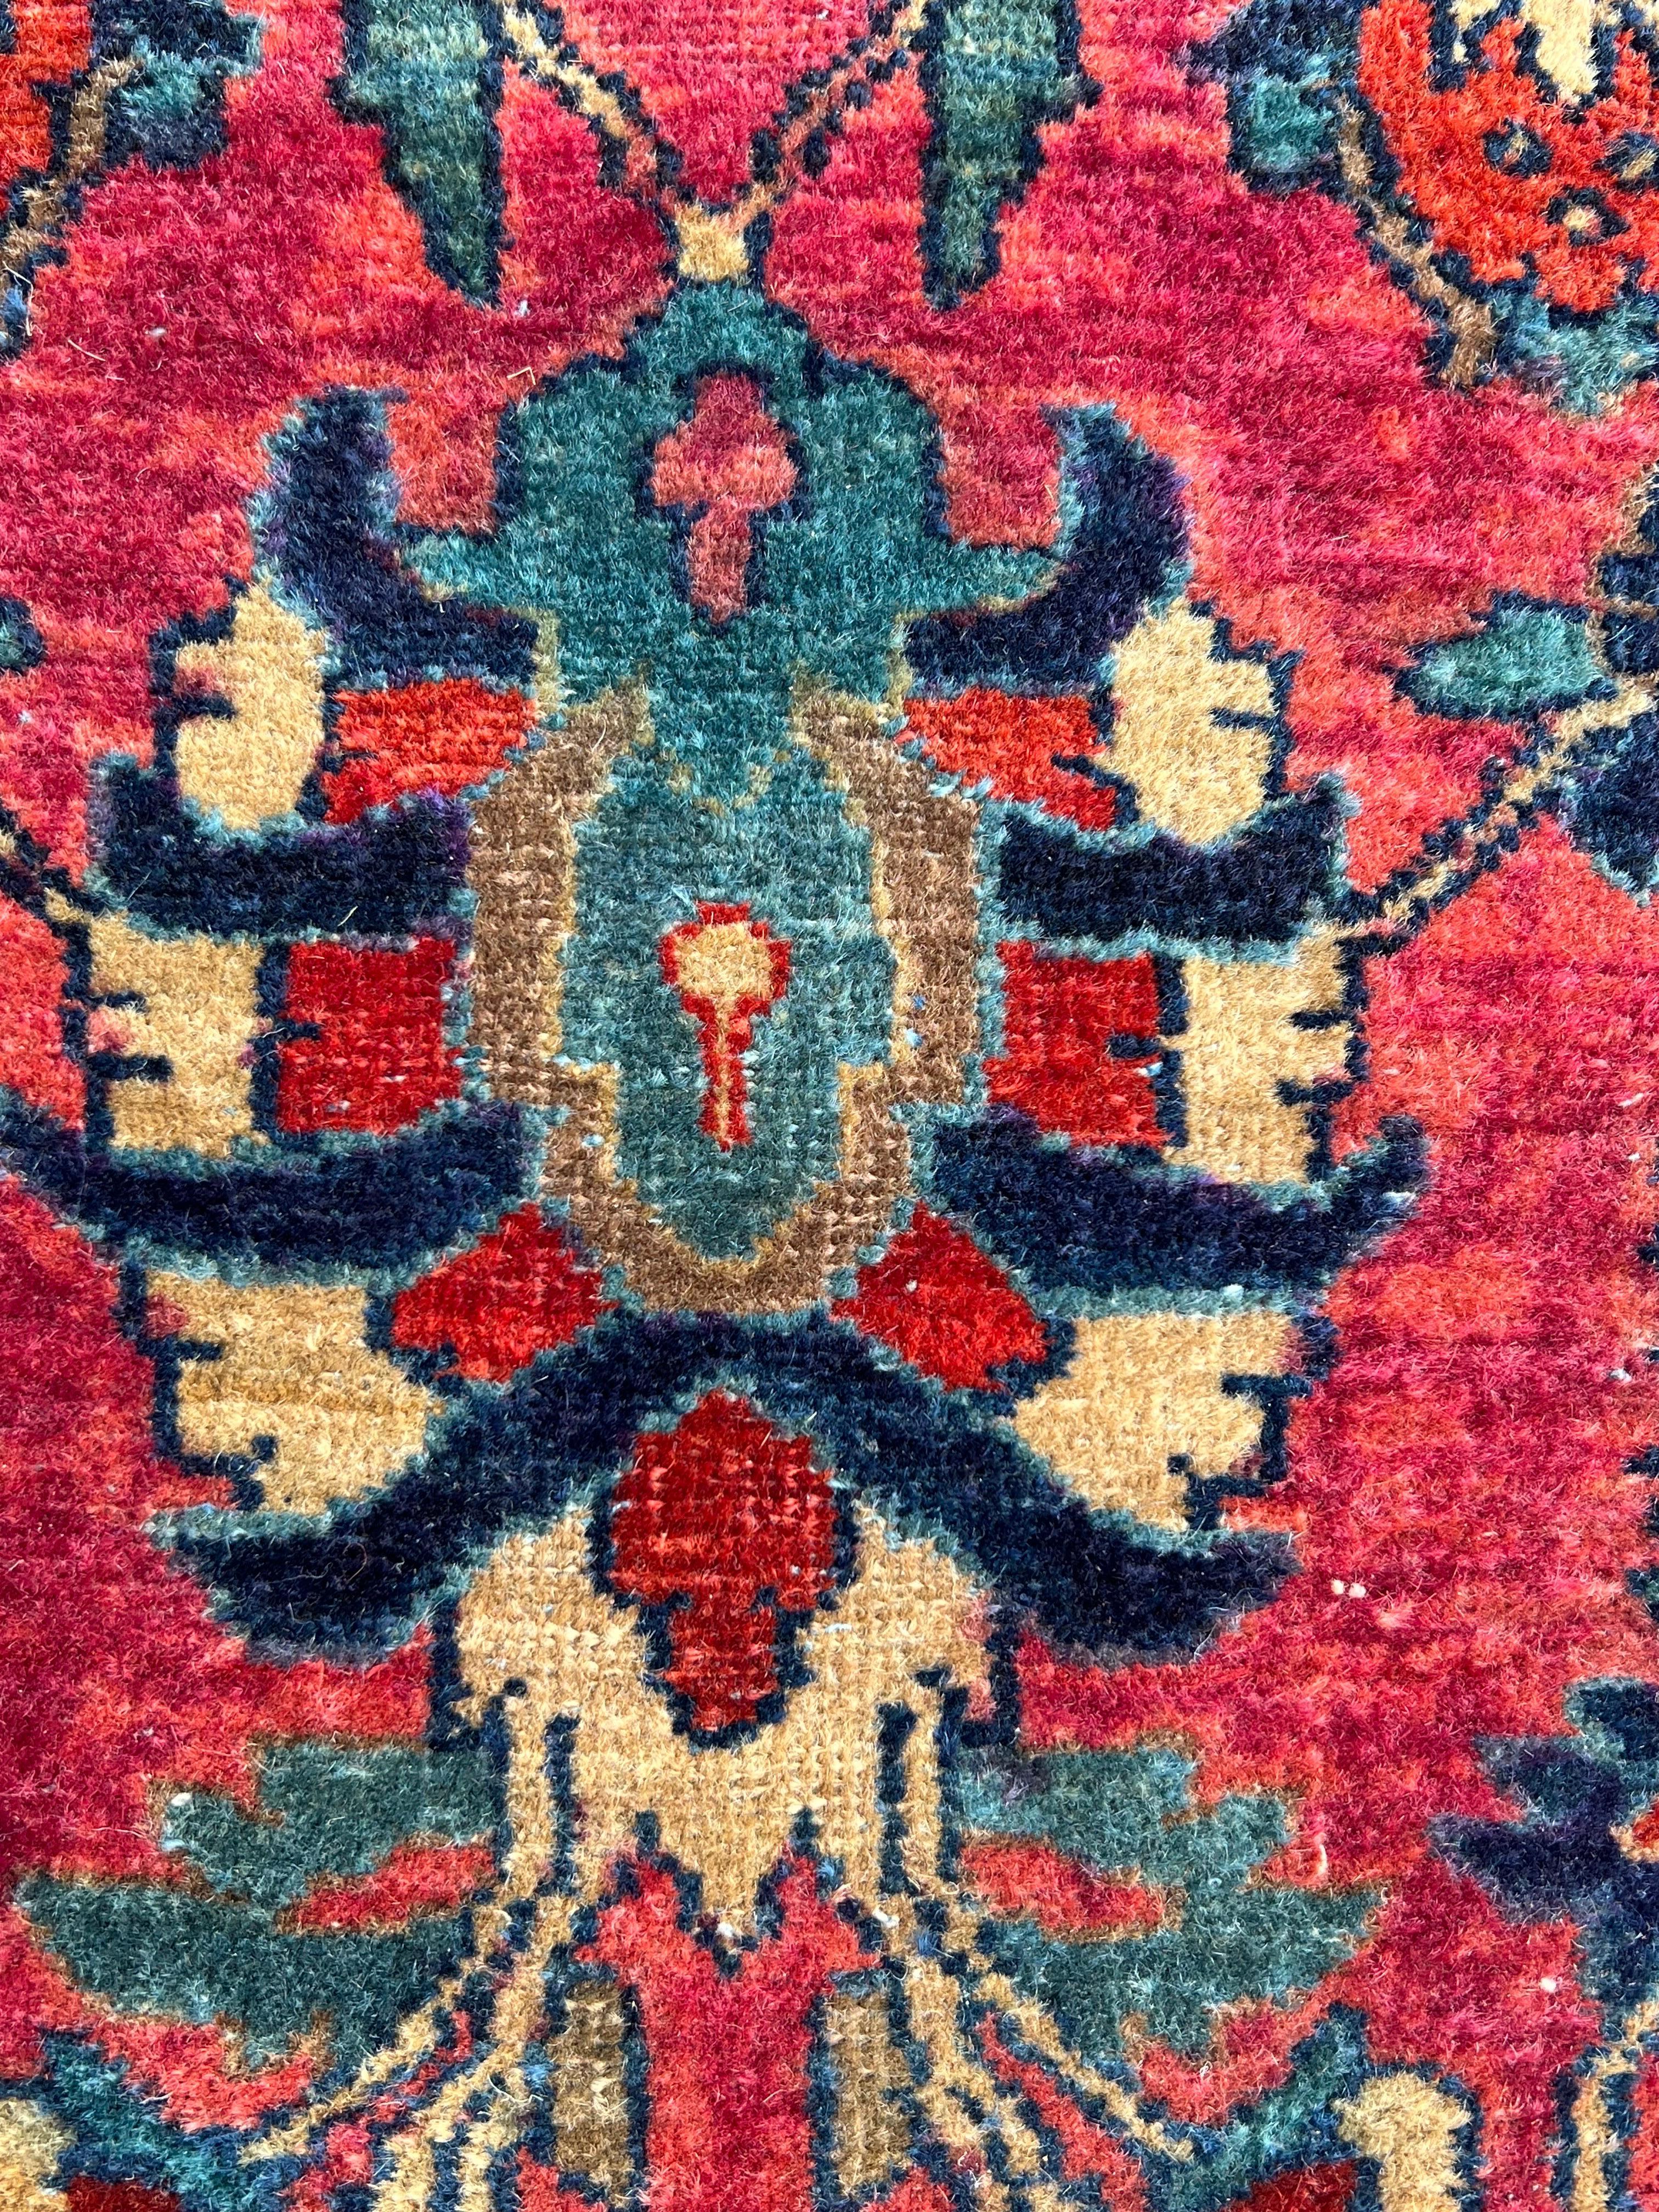 Vegetable Dyed Mid 20th Century Persian Rug 5' x 7' In Good Condition For Sale In Redding, CT